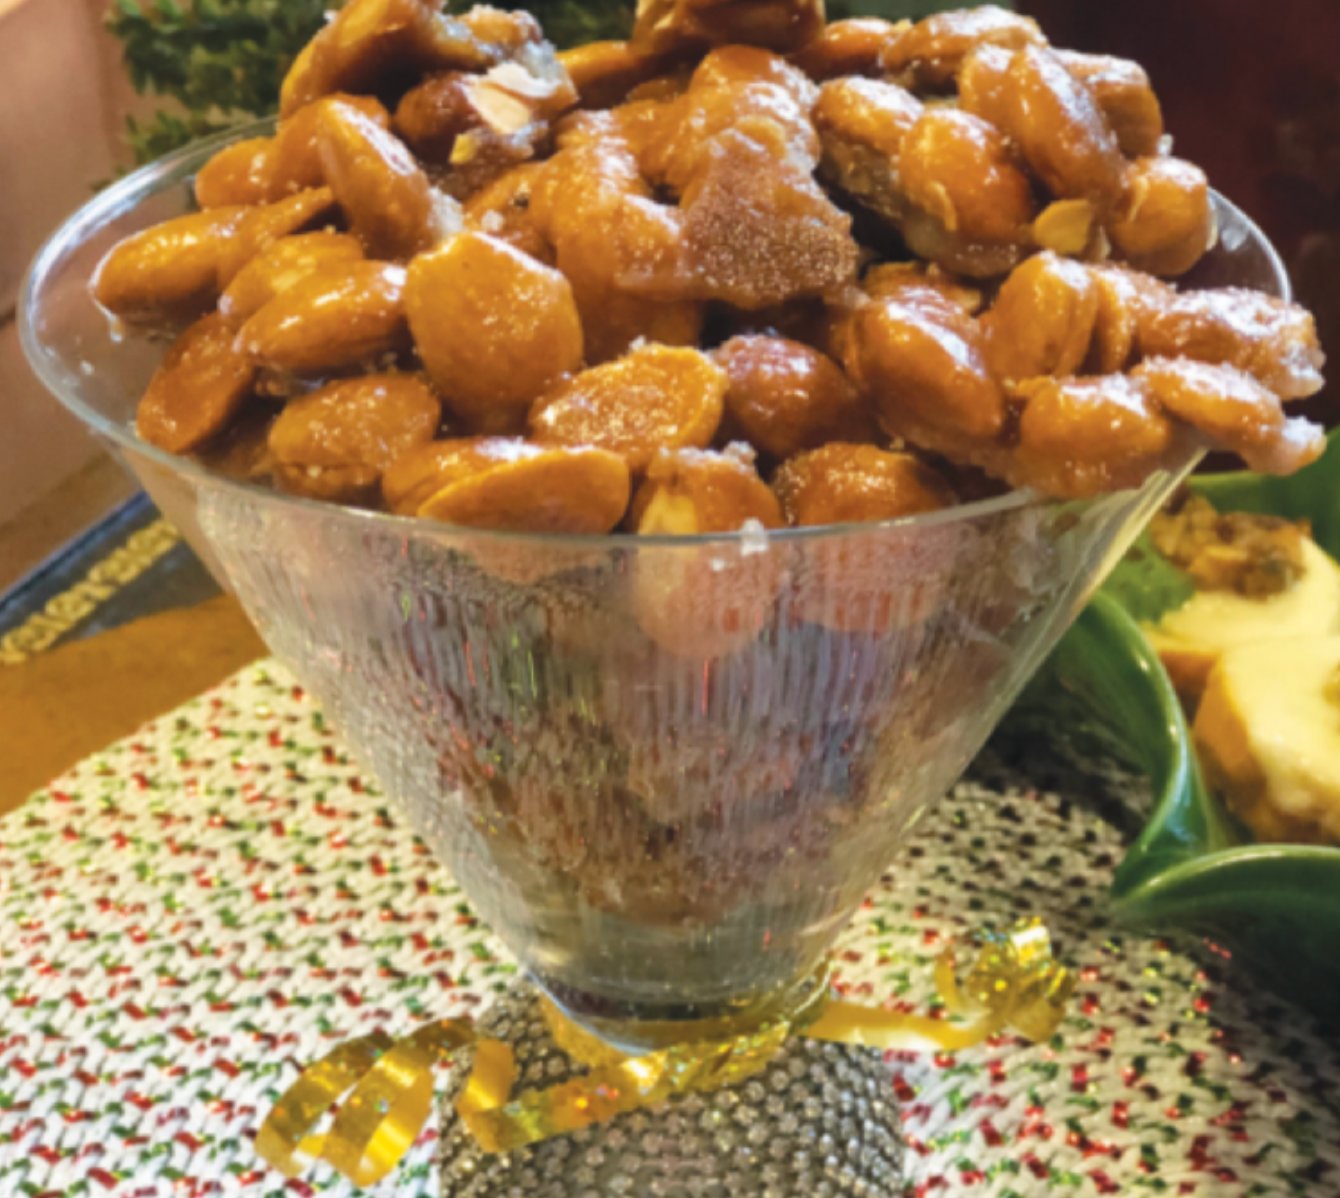 Iced Marcona Almonds make a delicious holiday gift.